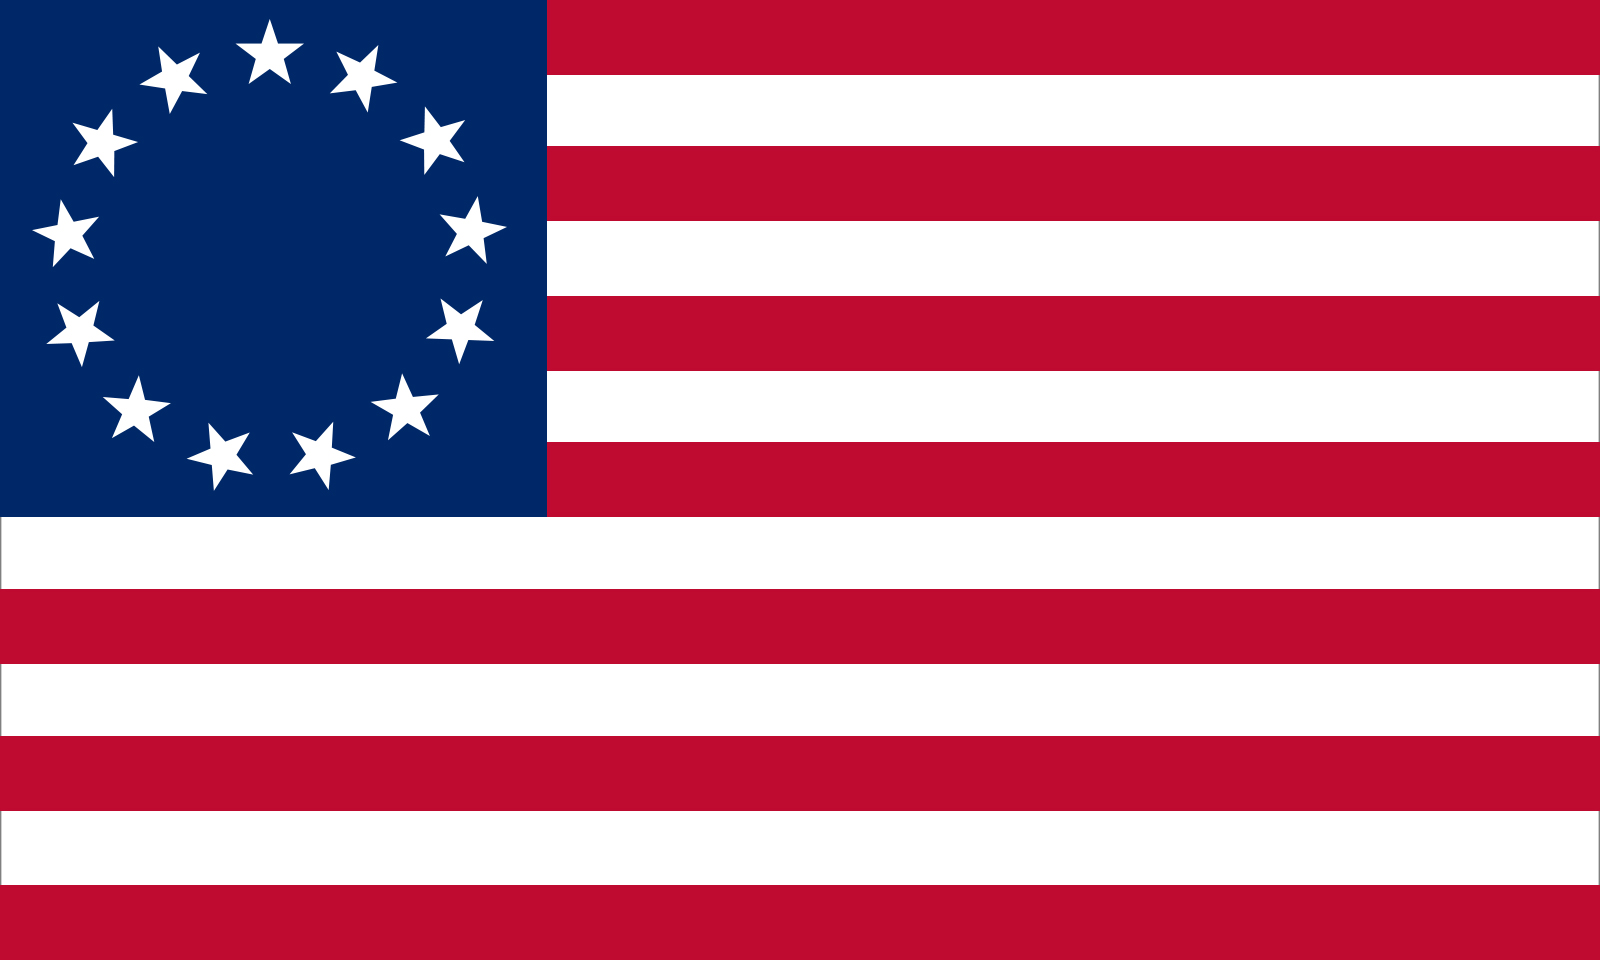 U.S. flag commonly attributed to Betsy Ross. Photo: Britannica